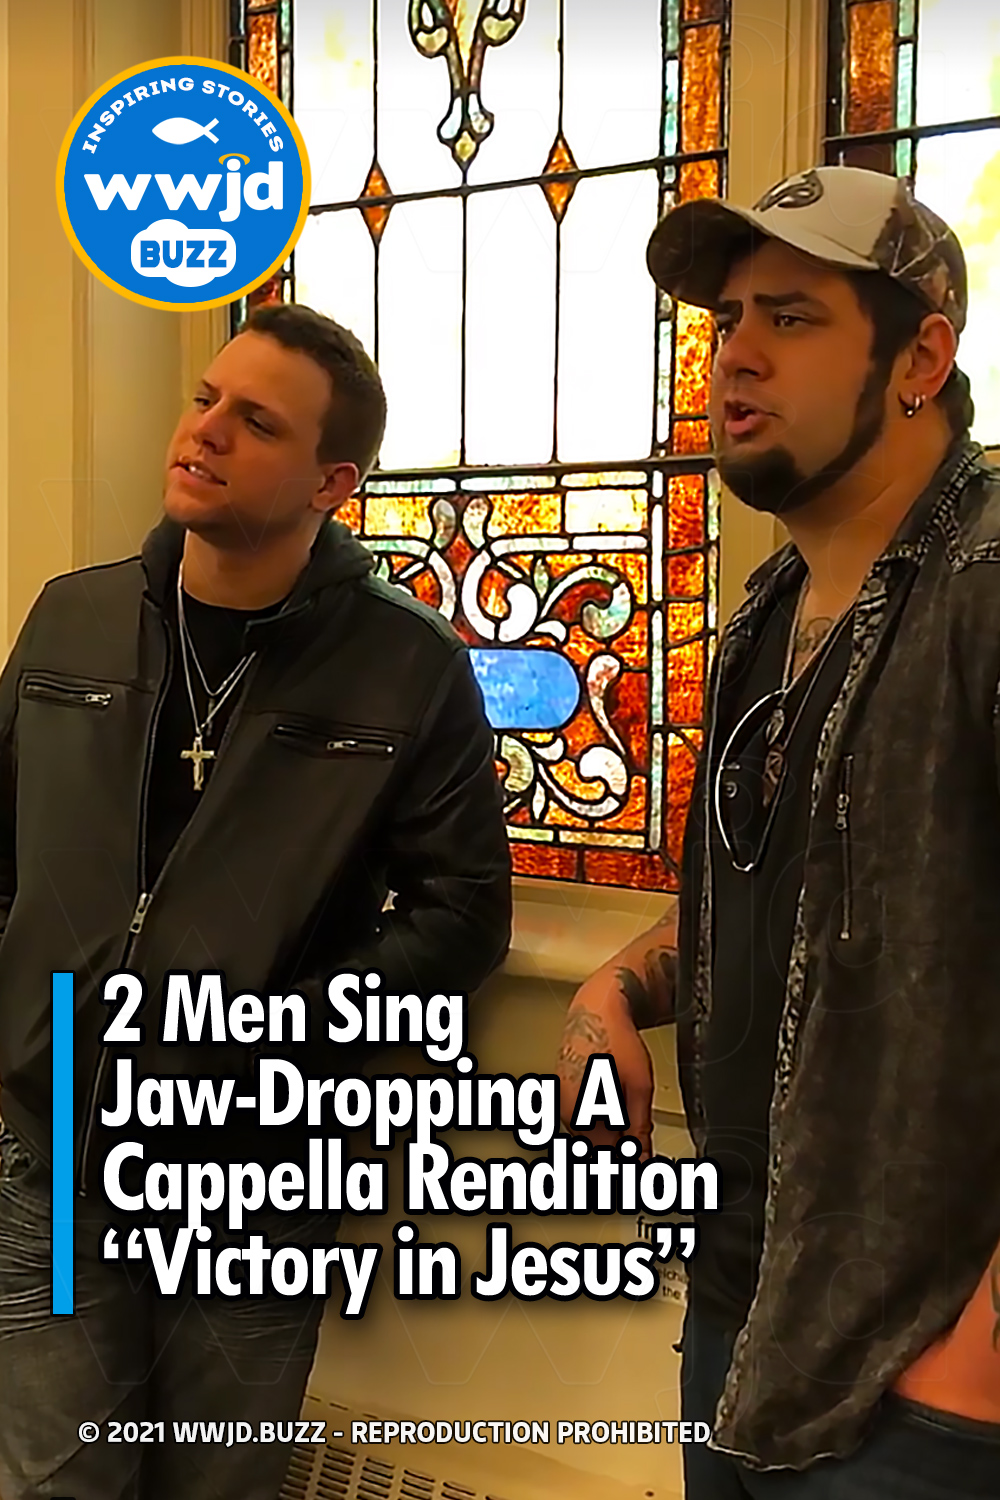 2 Men Sing Jaw-Dropping A Cappella Rendition “Victory in Jesus”